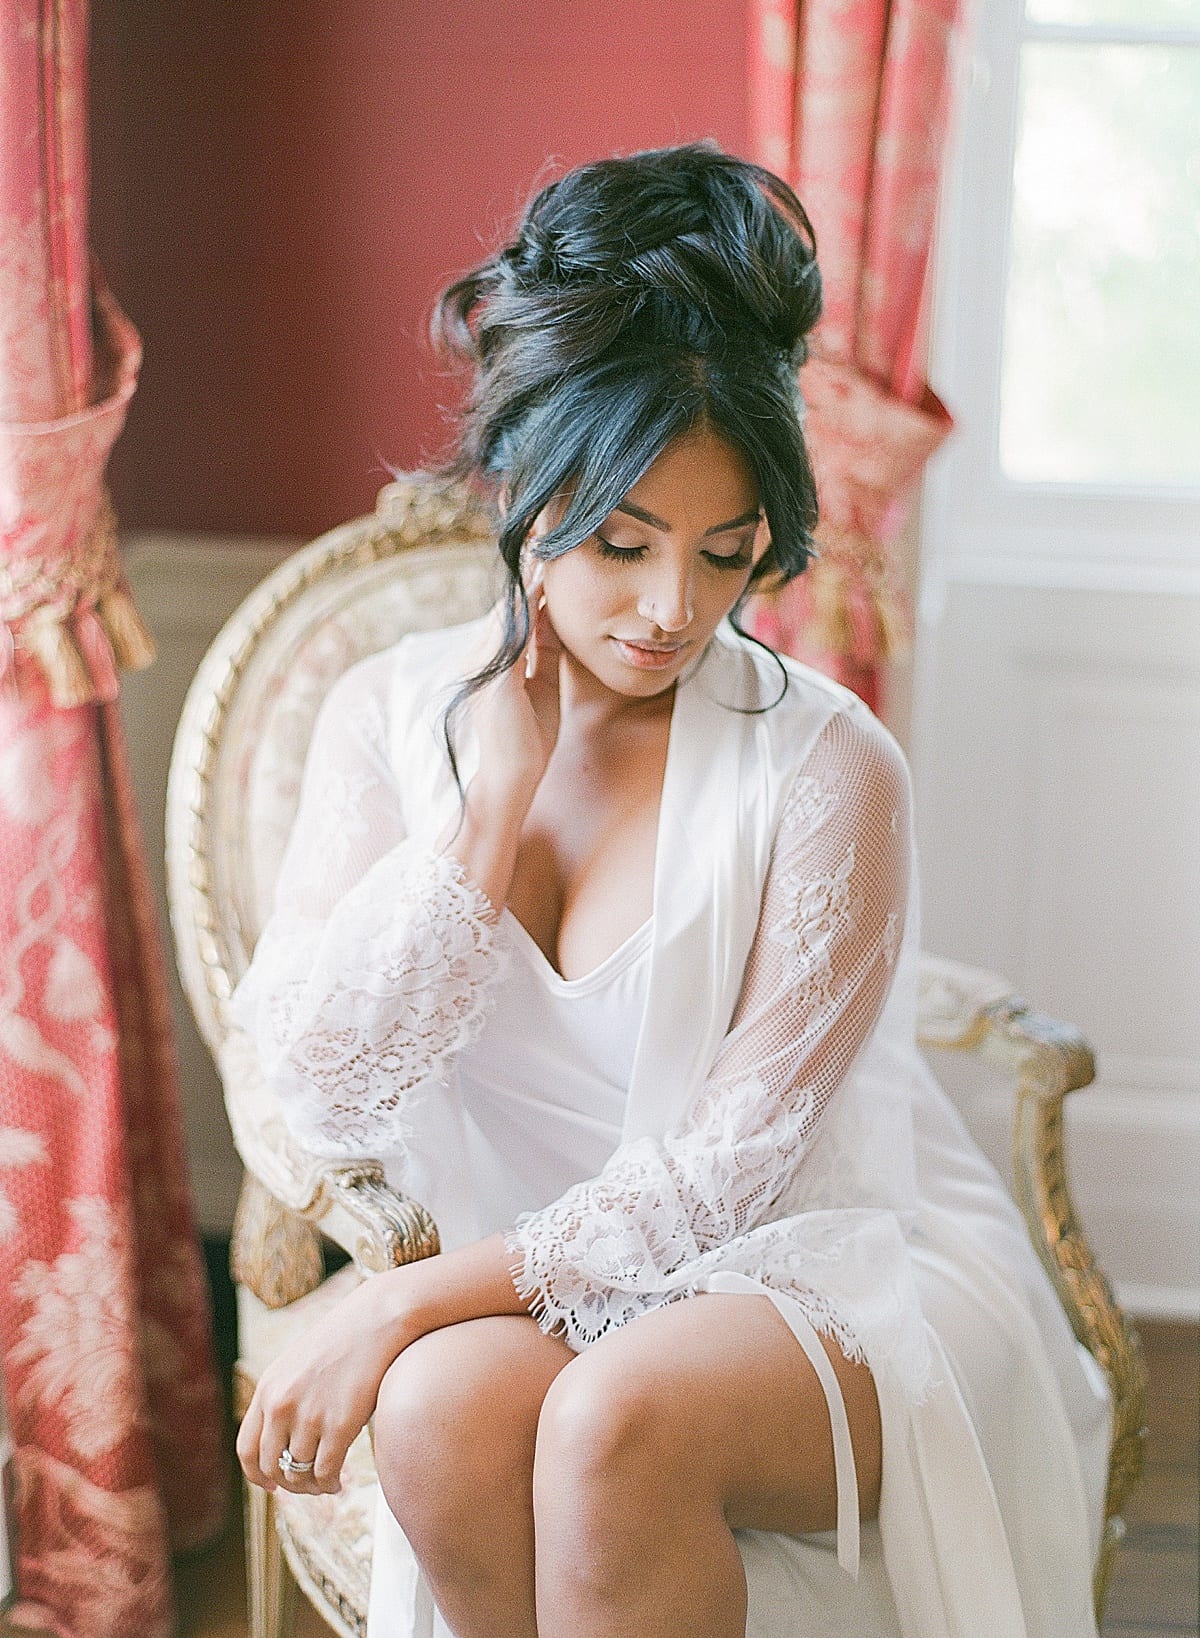 Bride in Lace Robe Sitting in Chair Looking Down Photo